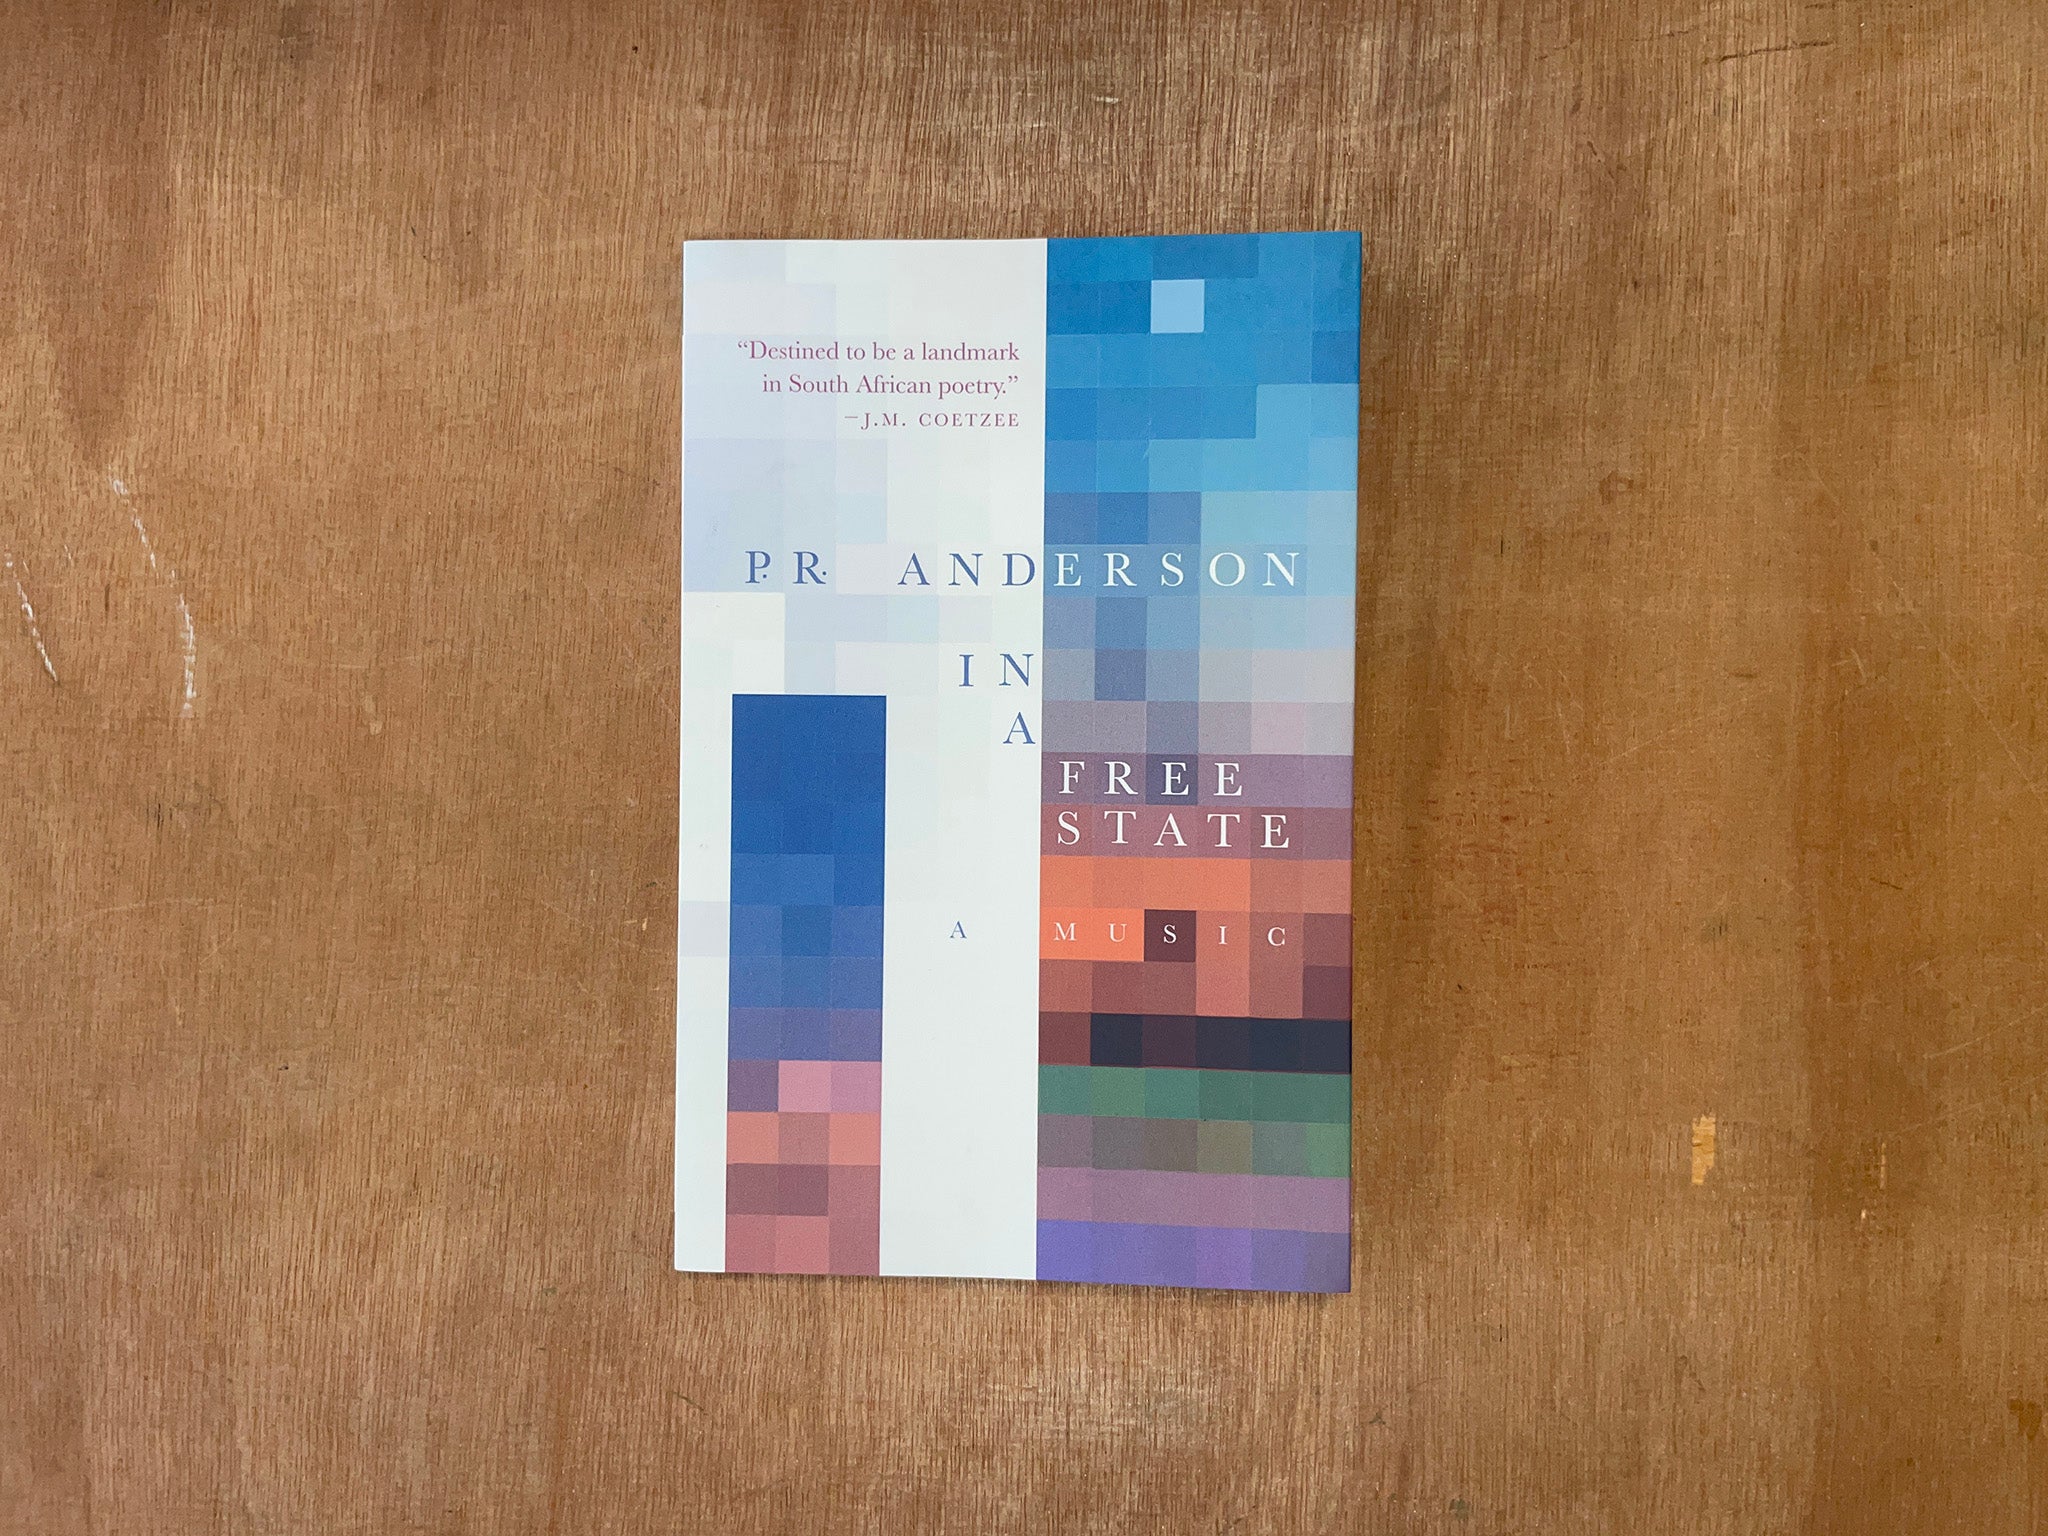 IN A FREE STATE by P.R. Anderson